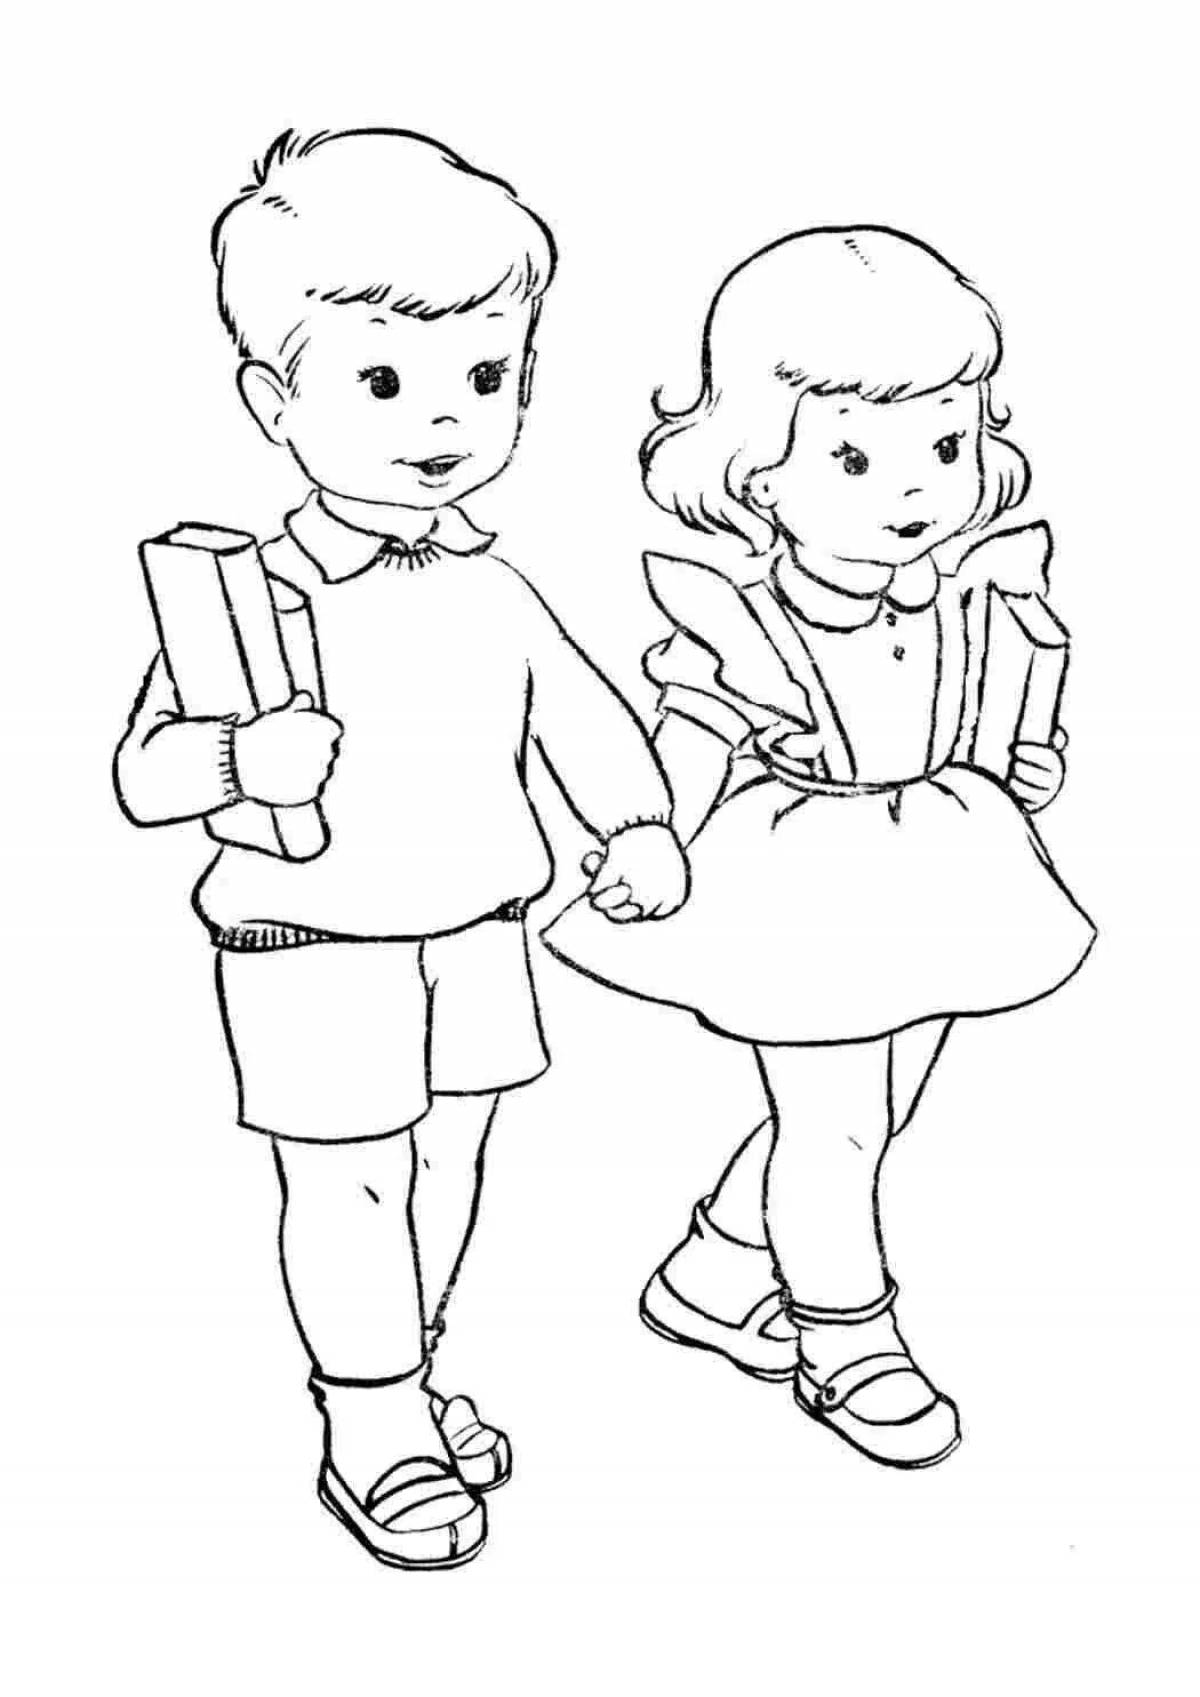 Crazy coloring pages for boys and girls